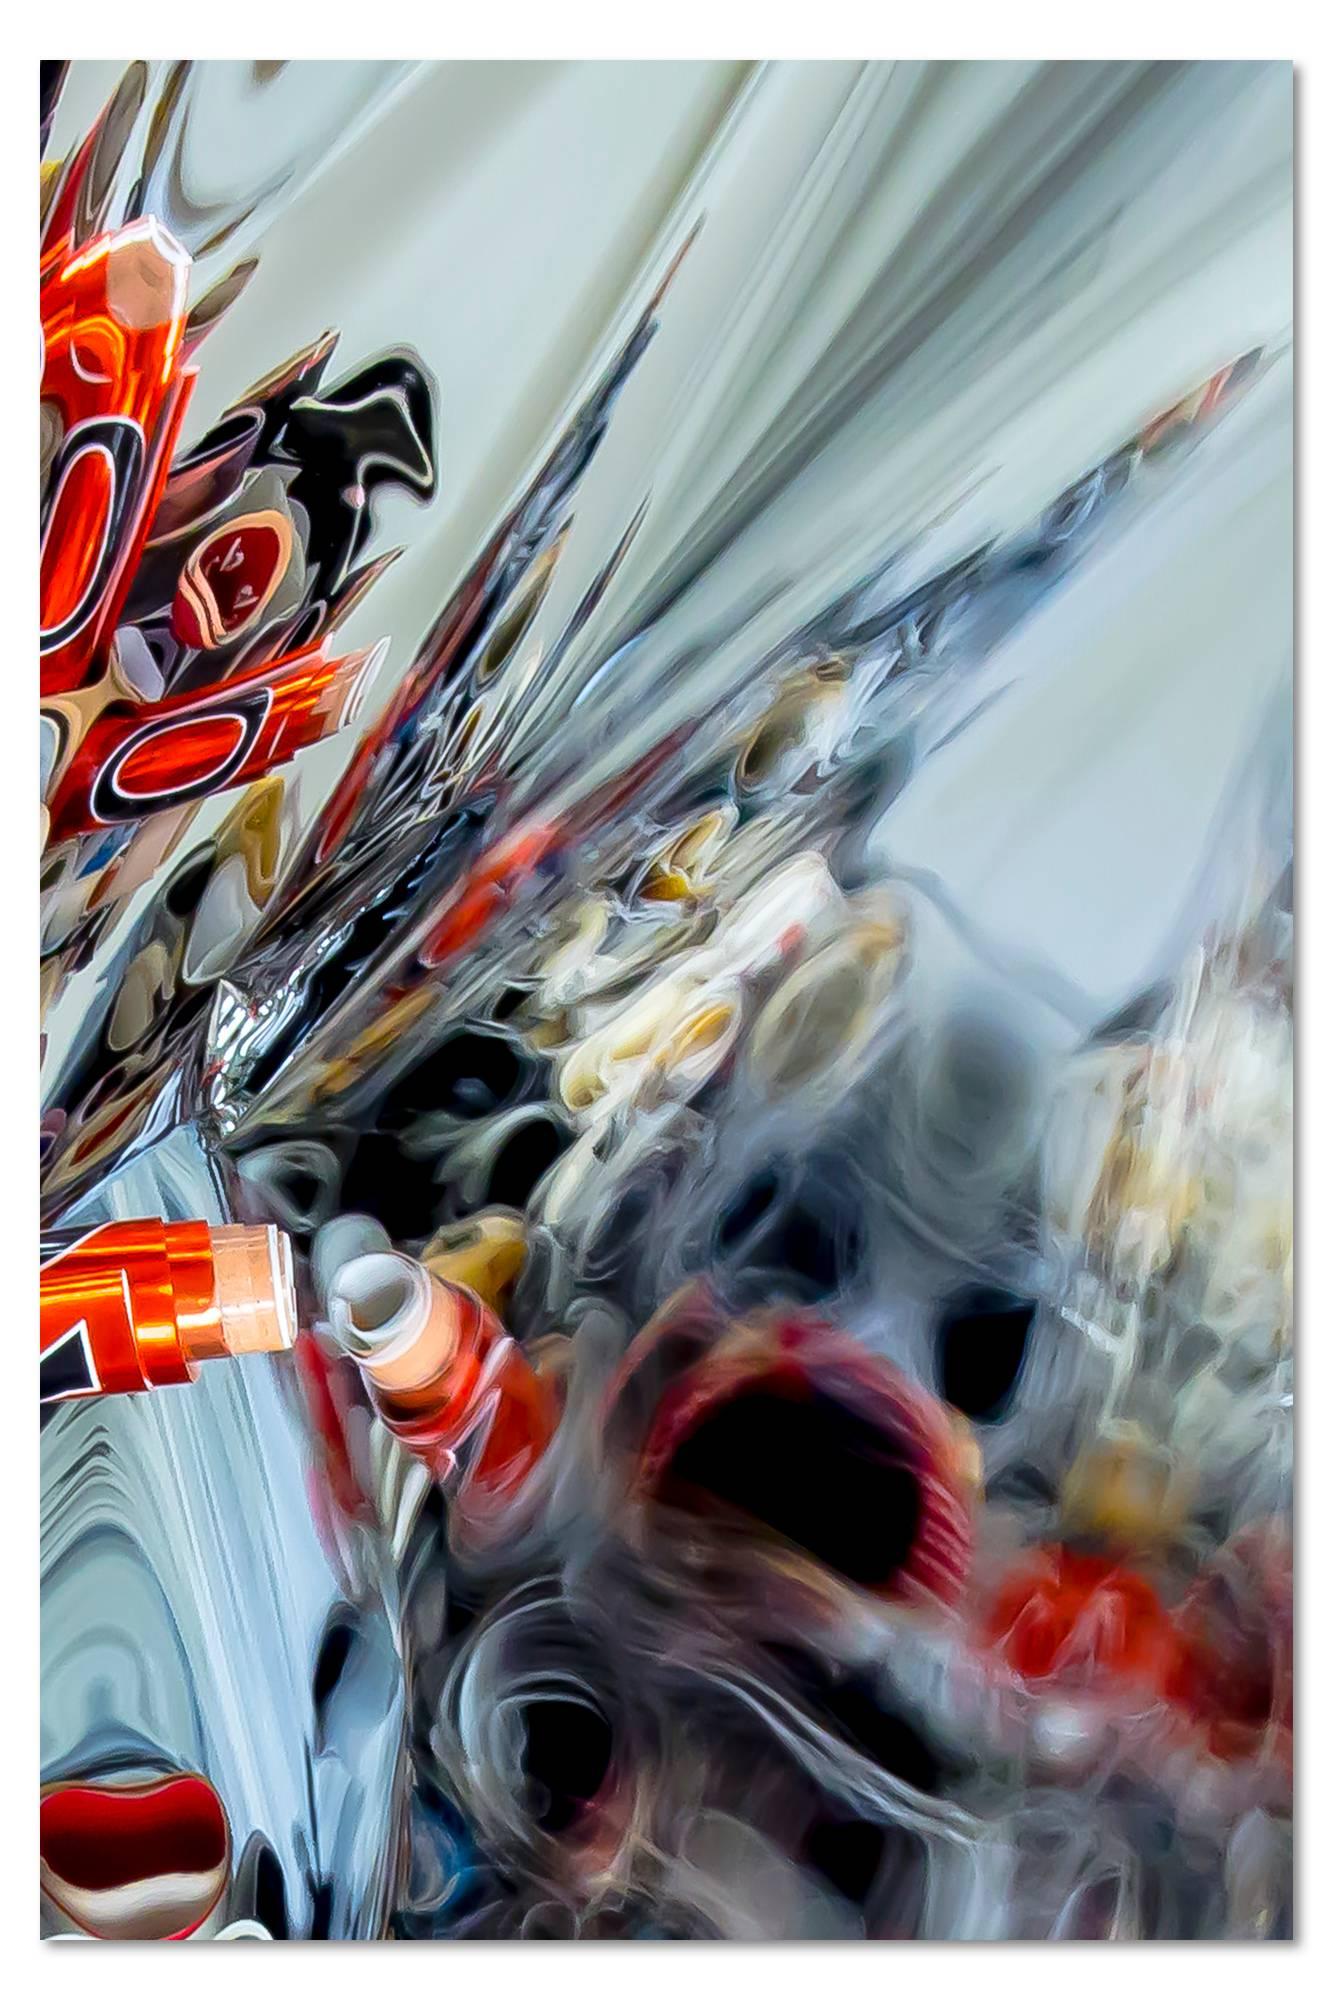 Best Sellers Out of Control Vortex (Color Photo, Limited Edition Print, #1 of 3) - Contemporary Photograph by Alex Vignoli